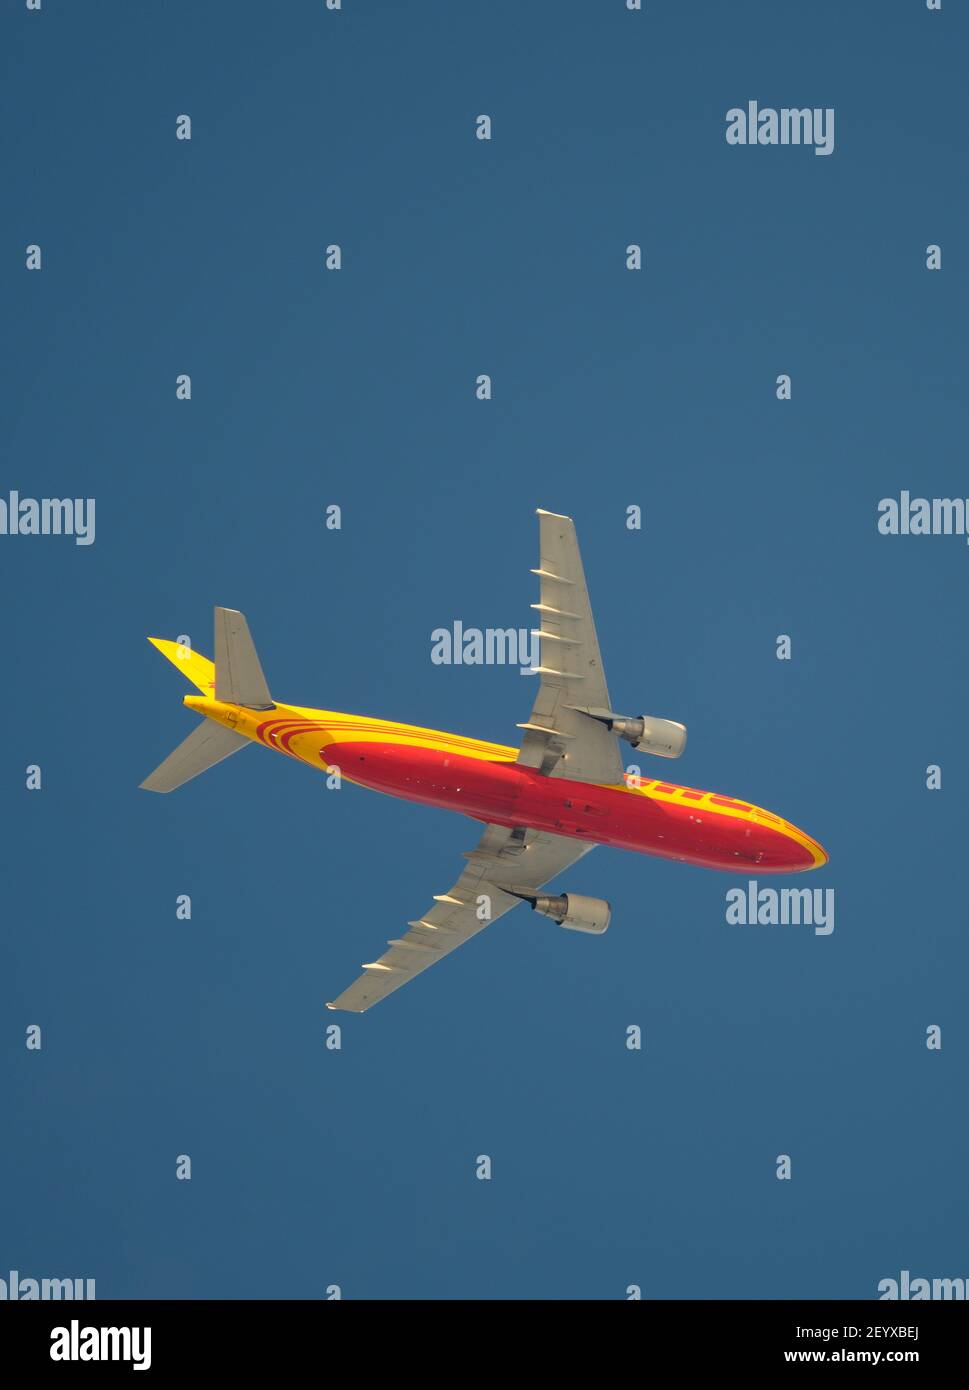 London, UK. 6 March 2021. Distinctive livery of a DHL Airbus A300B4 cargo flight as it climbs out of London Heathrow airport en route to Frankfurt. Credit: Malcolm Park/Alamy Live News Stock Photo